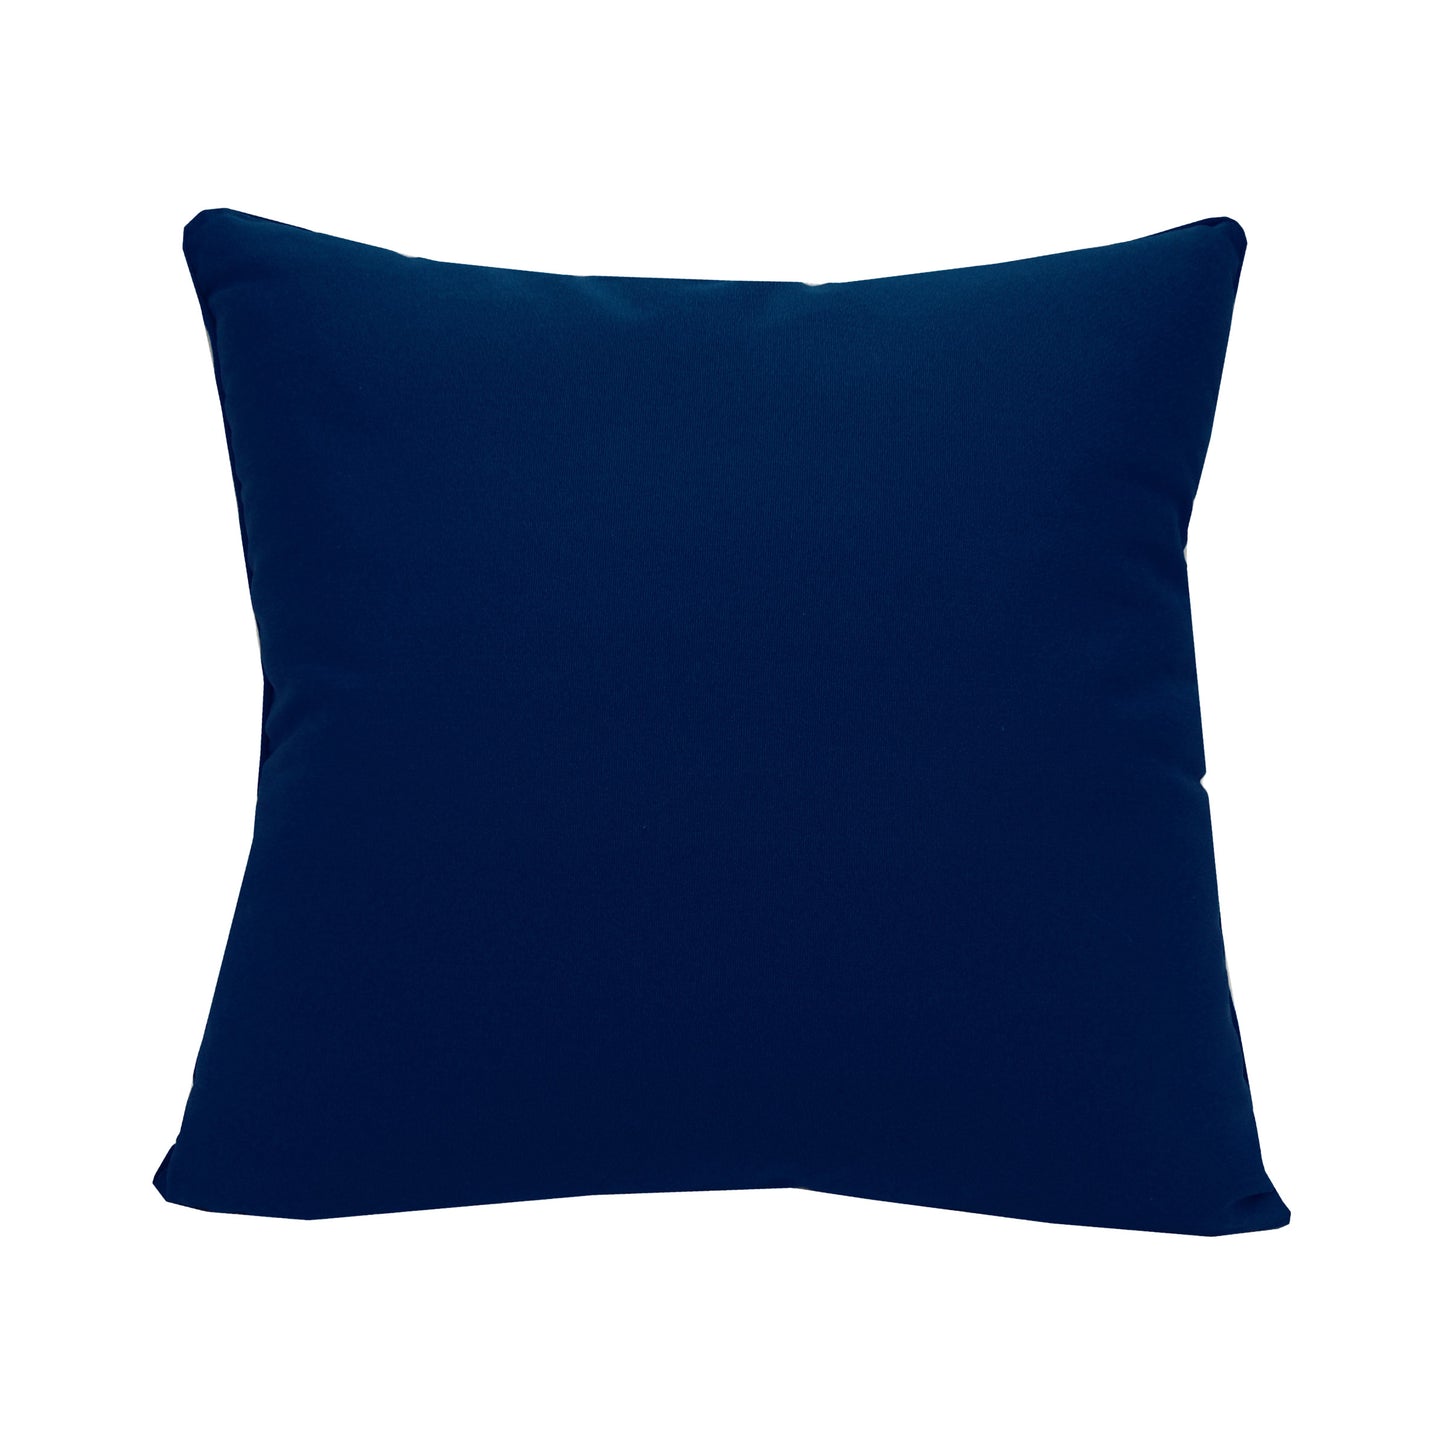 Solid navy blue fabric; back side of the Clam Pattern pillow.